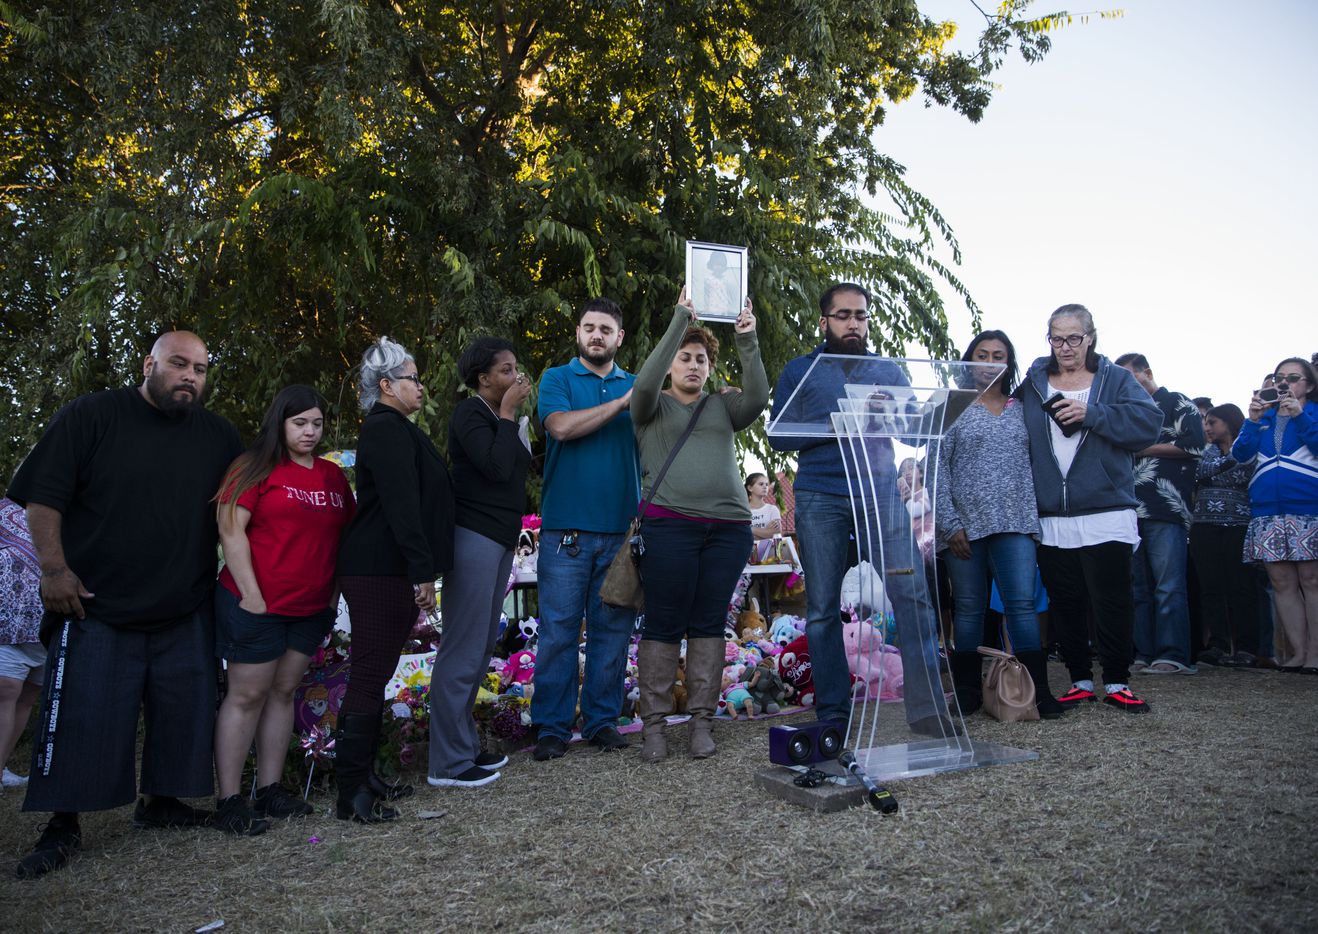 A group leads lead a vigil for missing 3-year-old Sherin Mathews on Sunday.